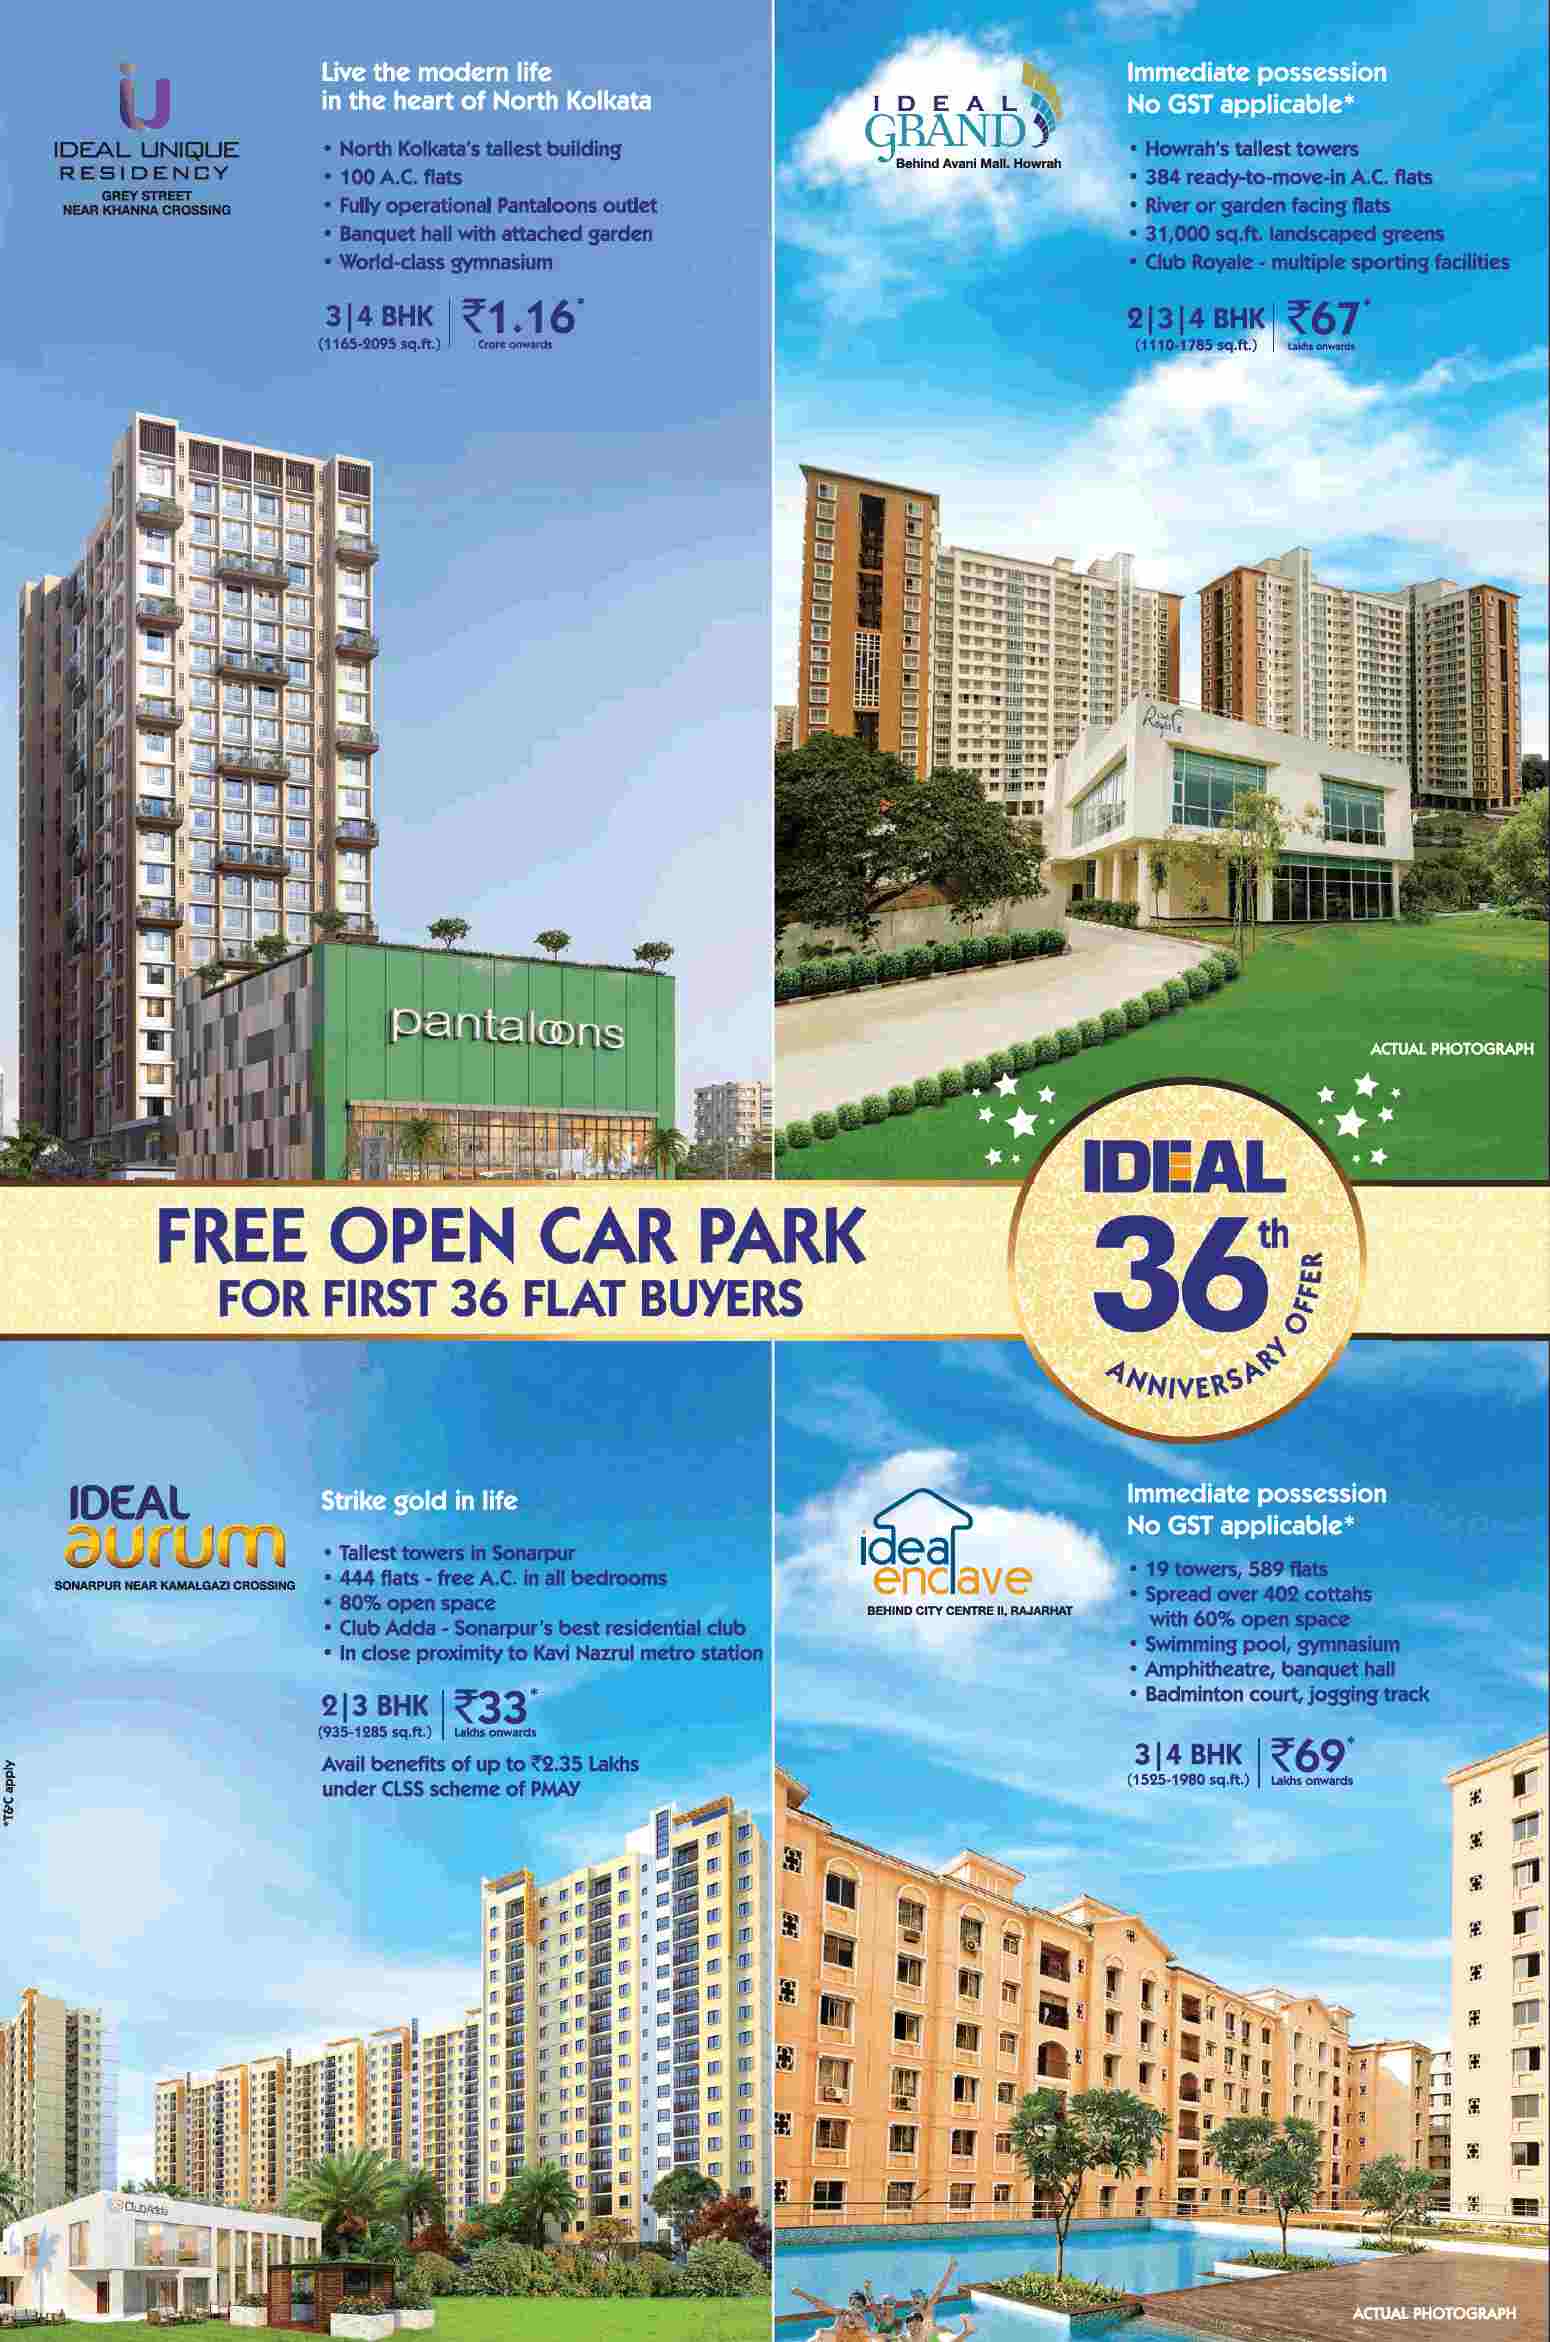 Avail the 36th-anniversary offer by investing at Ideal properties in Kolkata Update